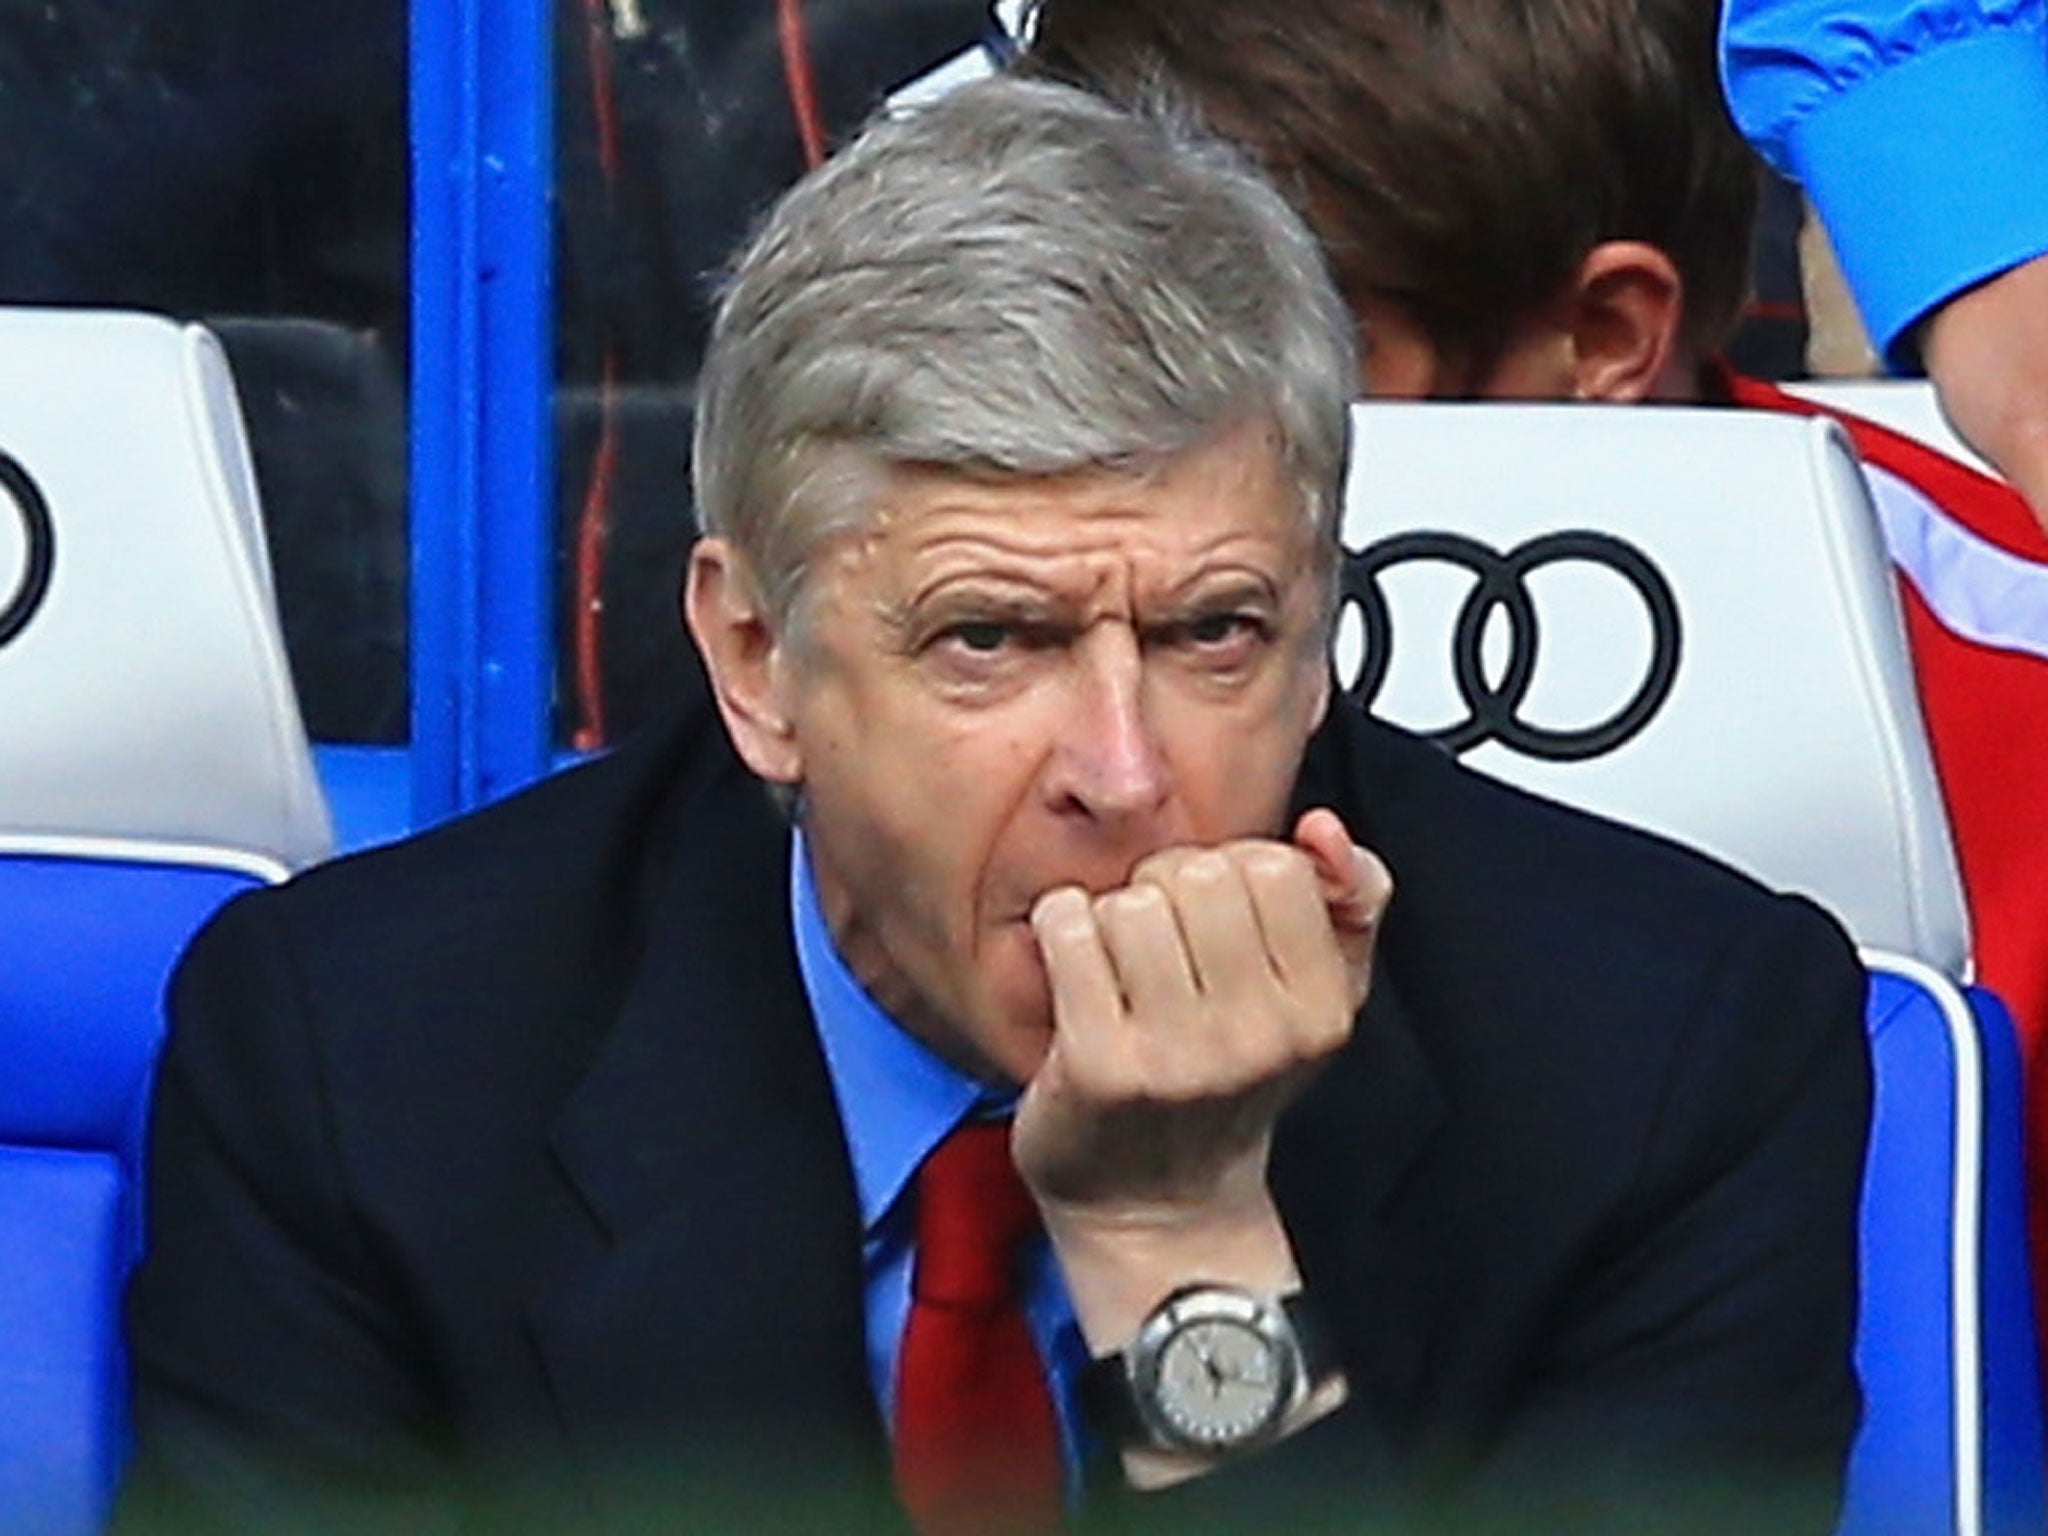 Arsène Wenger declined to face the press after his 1,000th game as Arsenal manager ended in defeat